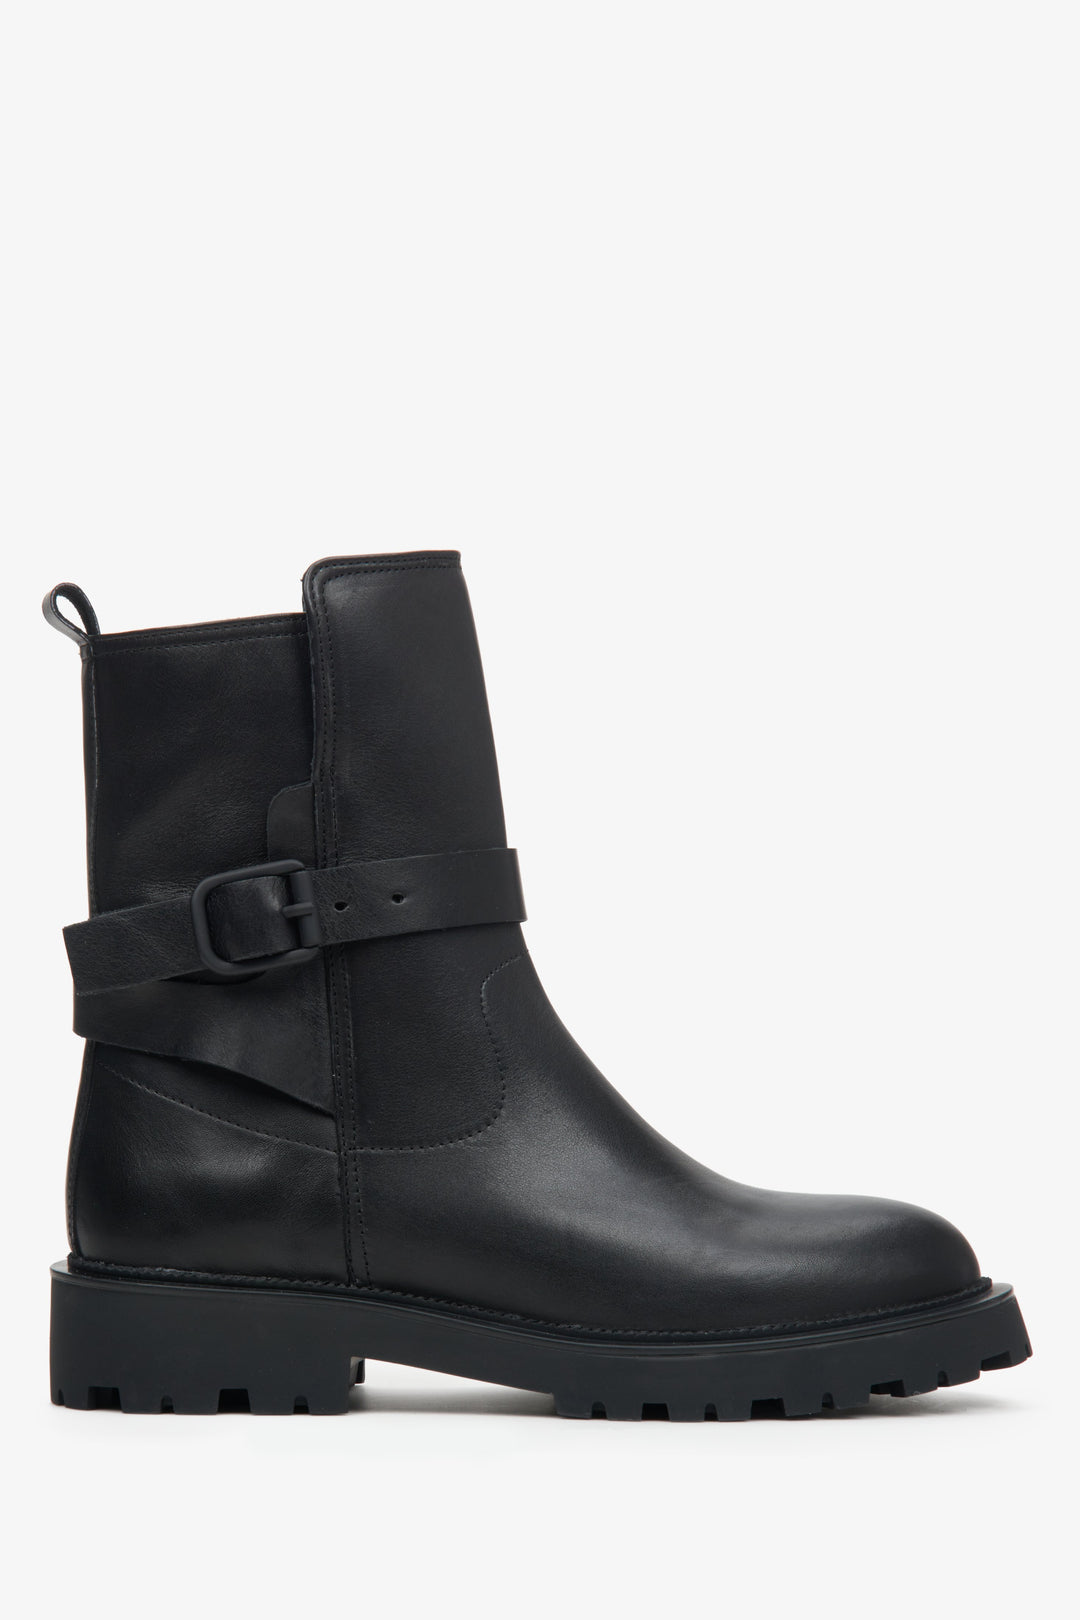 Women's Black Leather Ankle Boots with Soft Uppers Estro ER00113310.